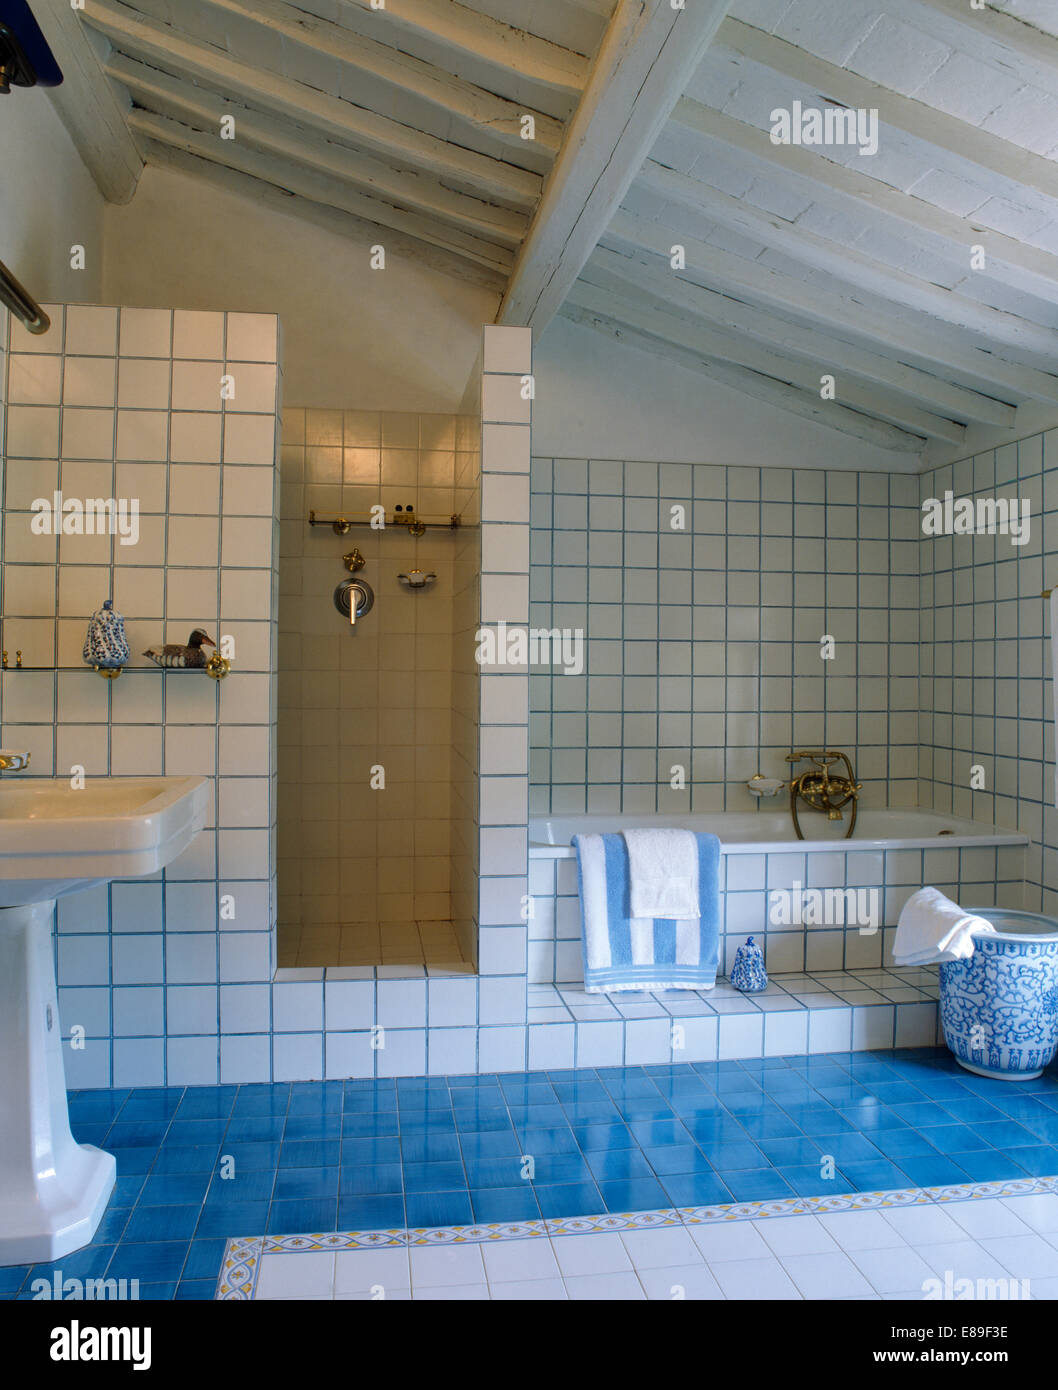 Aquamarine blue tiled floor in modern white tiled Tuscan bathroom with white painted ceiling beams Stock Photo